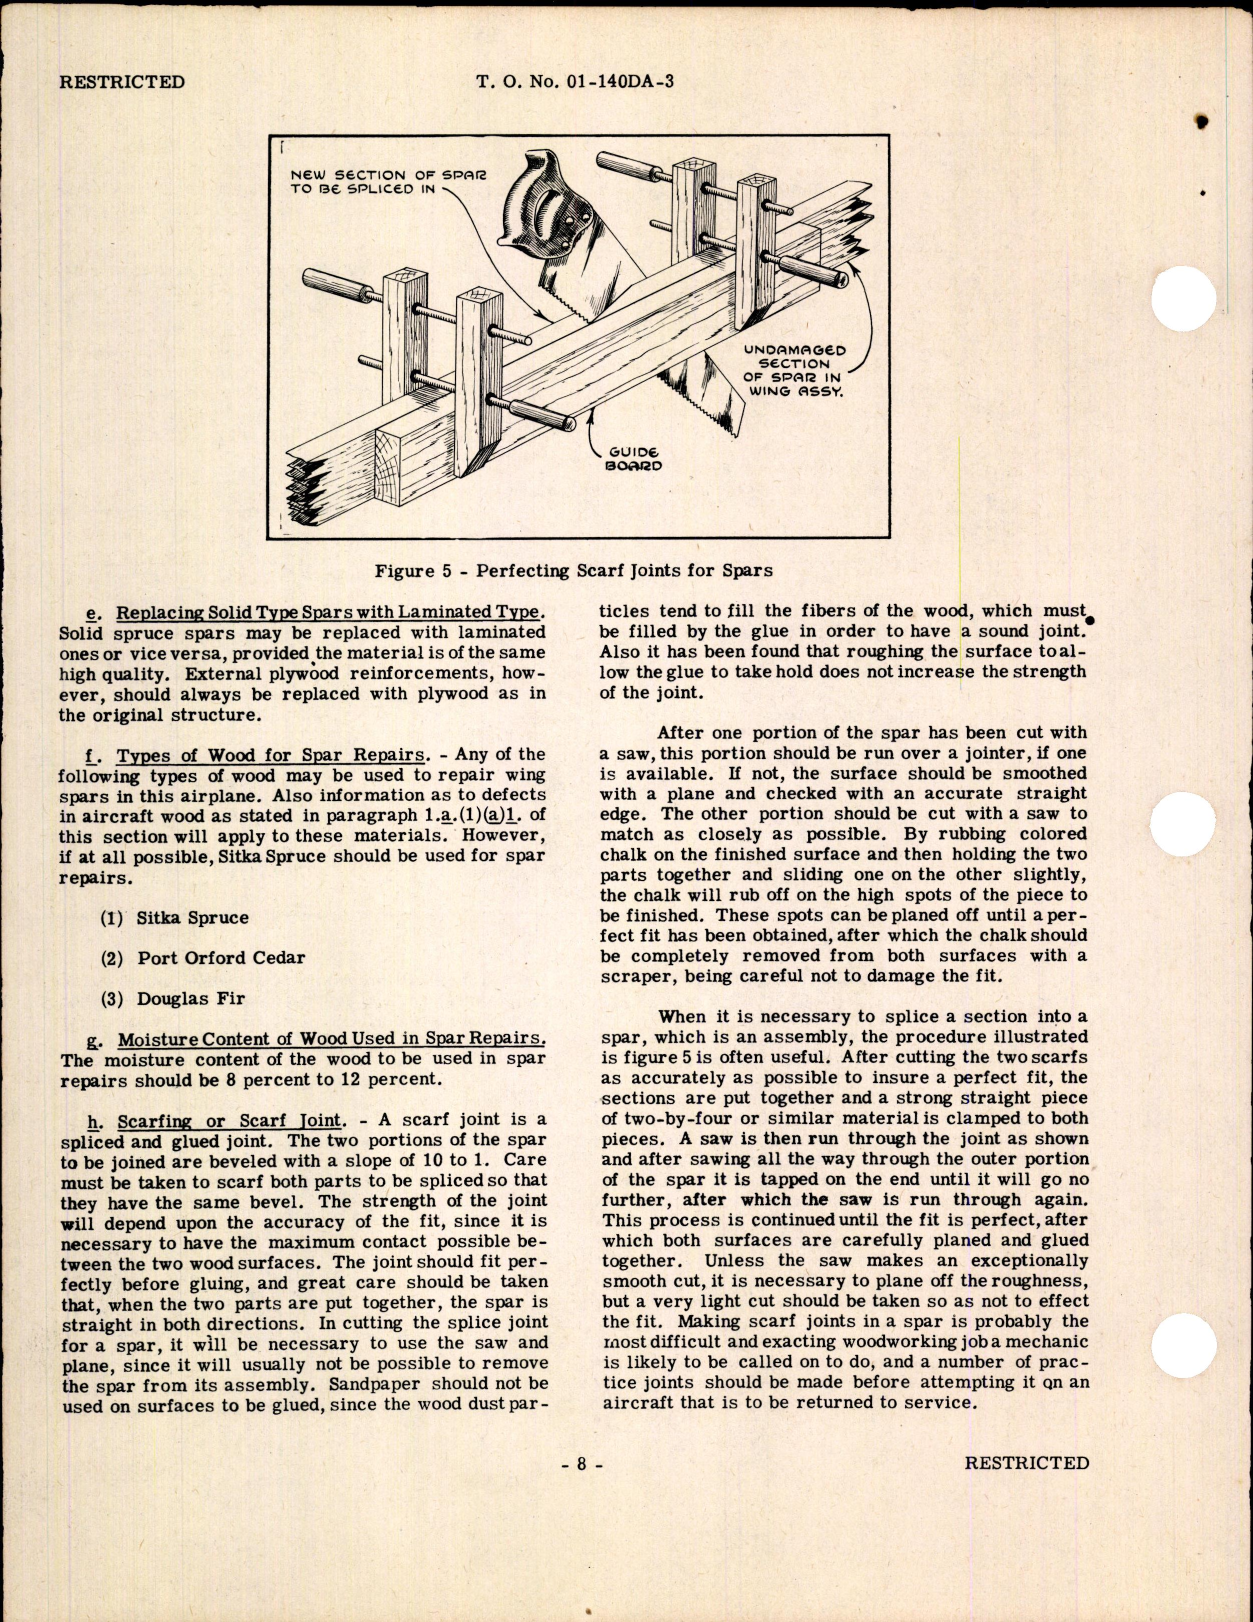 Sample page 10 from AirCorps Library document: Handbook of Instructions for the Structural Repair of the L-4 Series